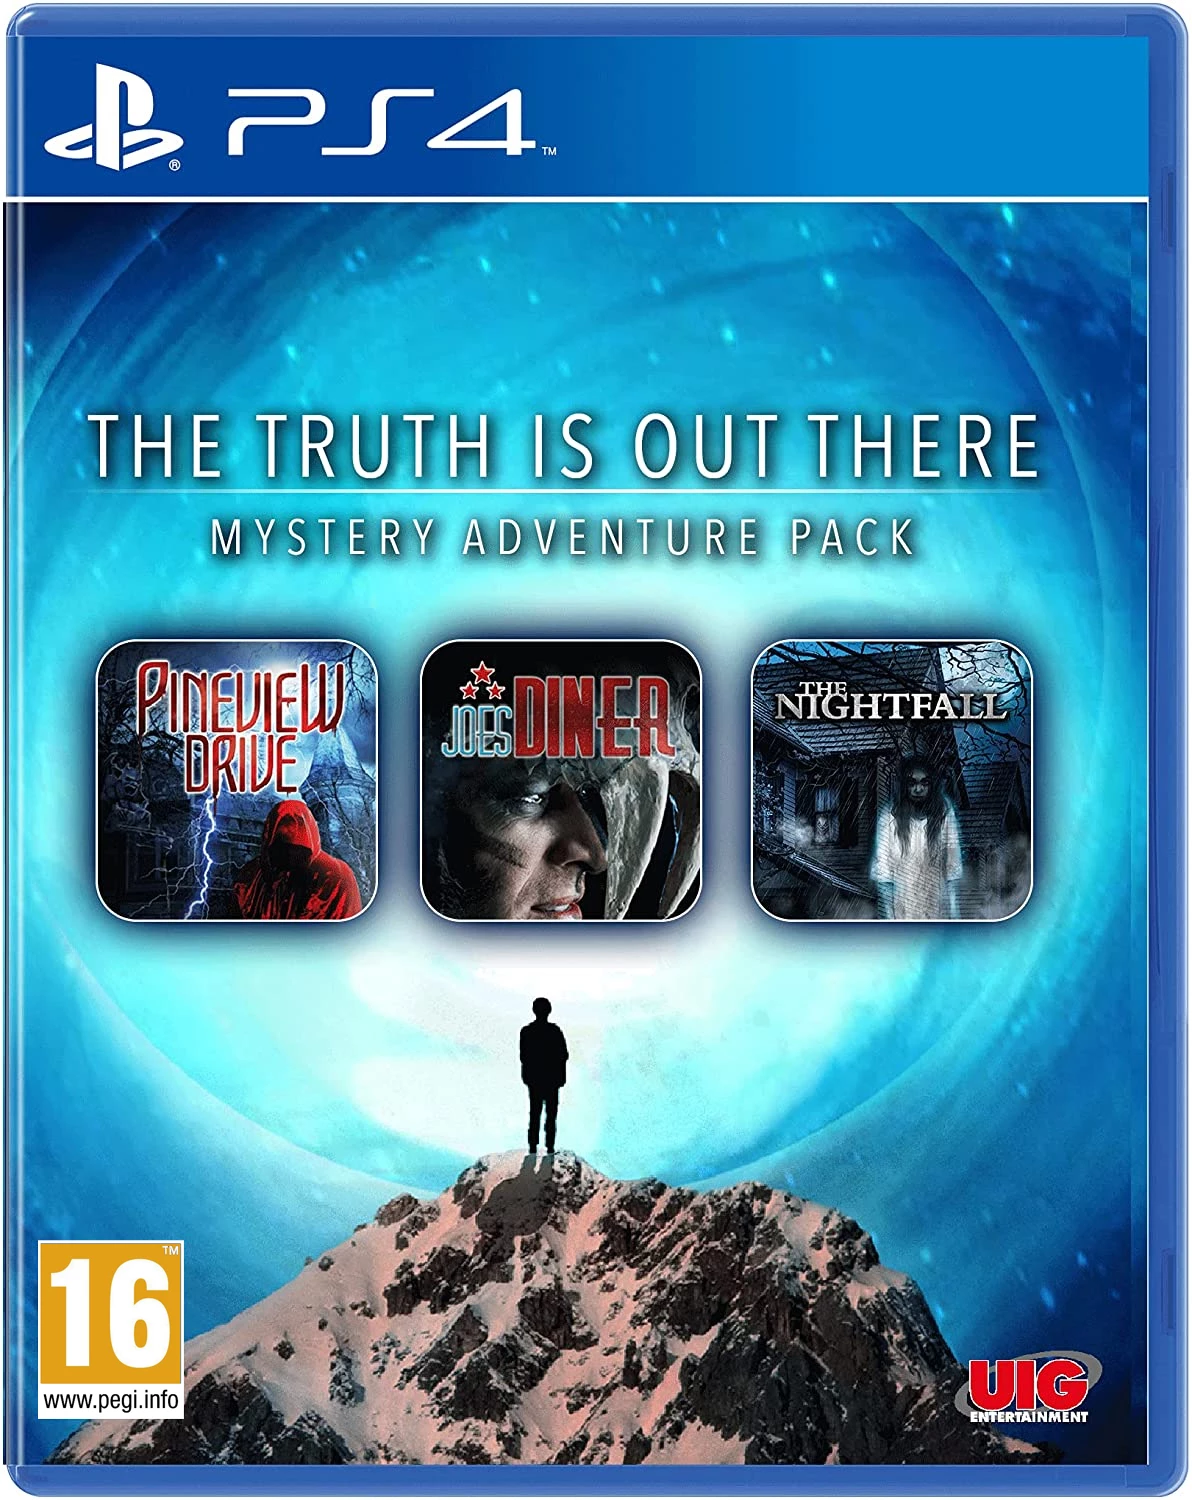 The Truth is Out There - Mystery Adventure Pack (PS4), UIG Entertainment